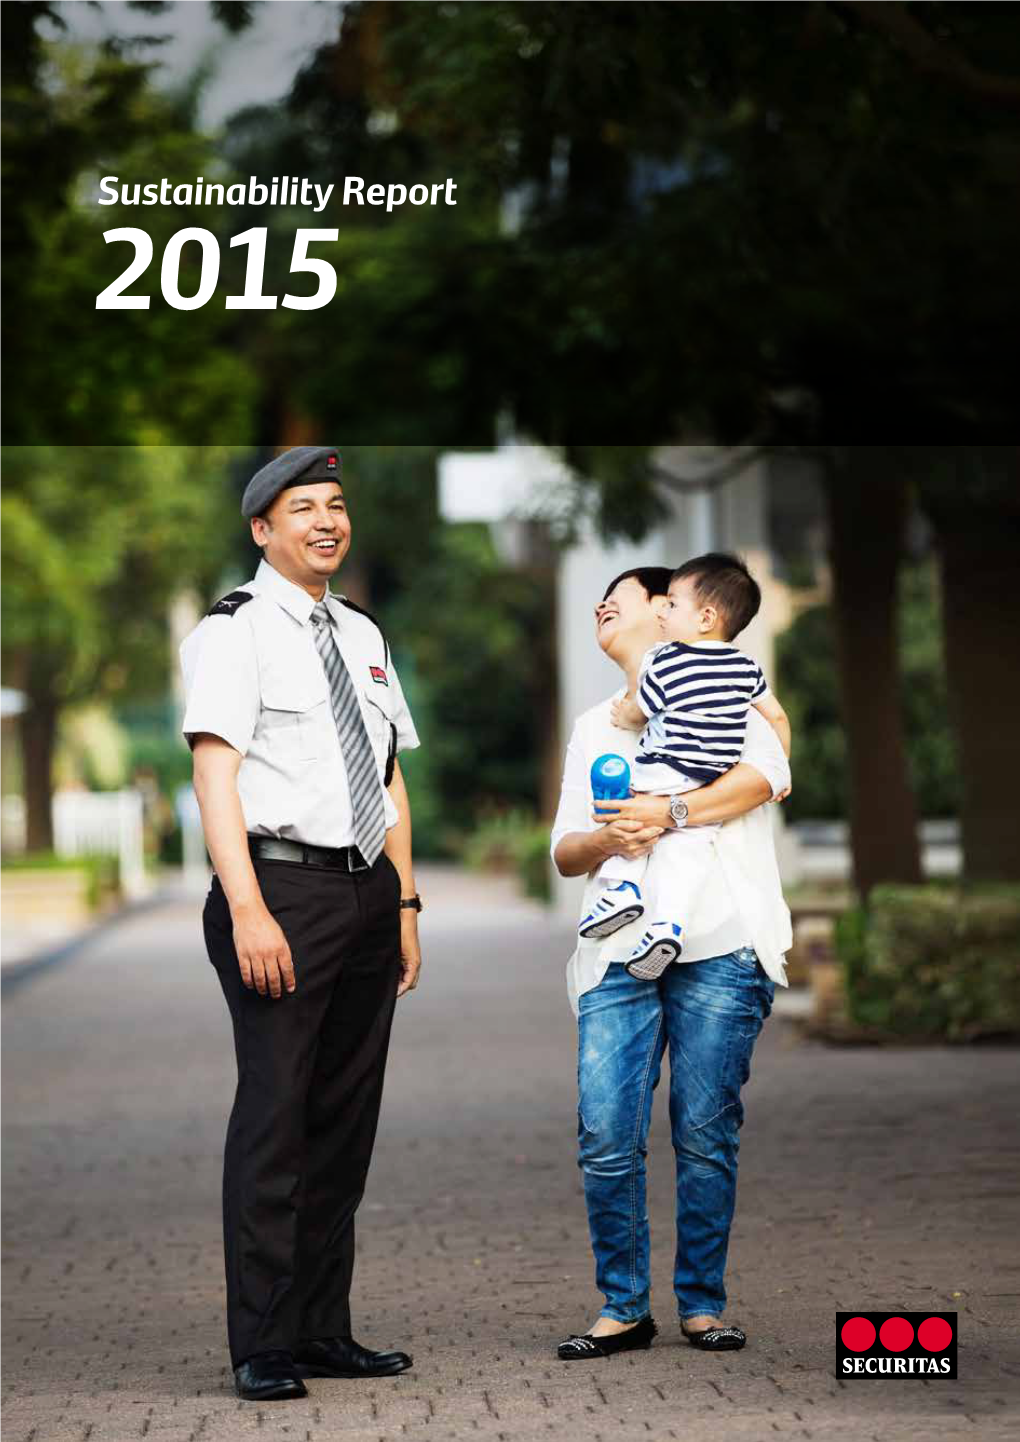 Sustainability Report 2015 Sustainability Reporting